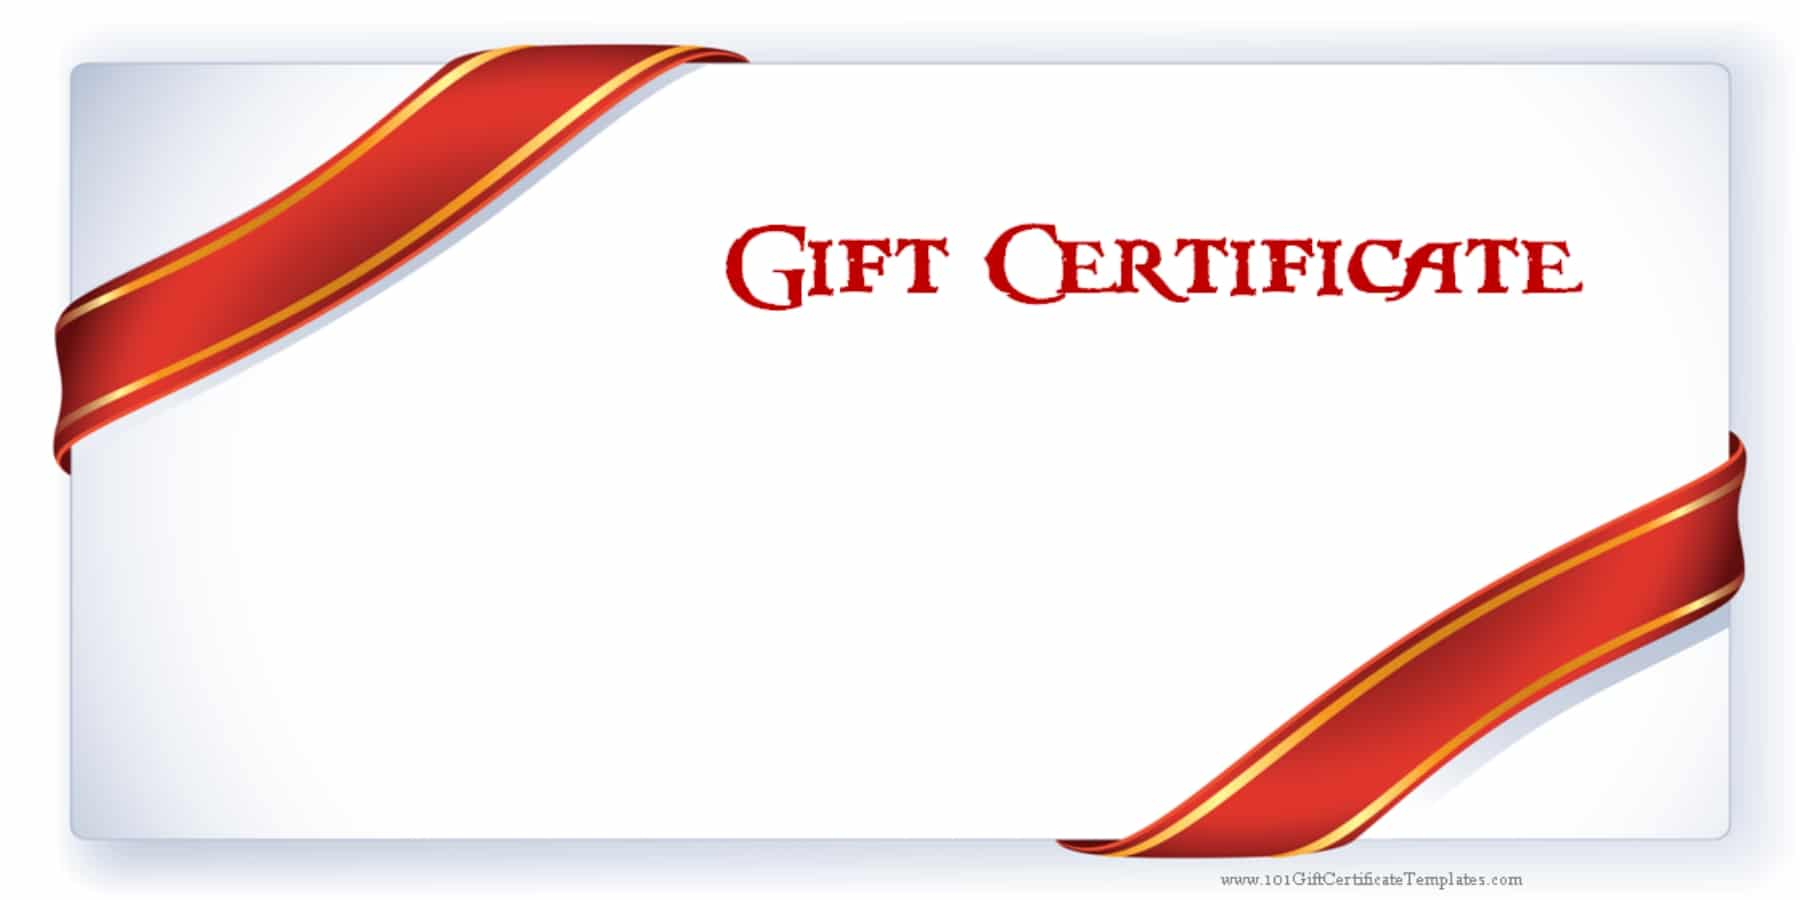 Printable Gift Certificate Templates - Free Printable Gift Certificates